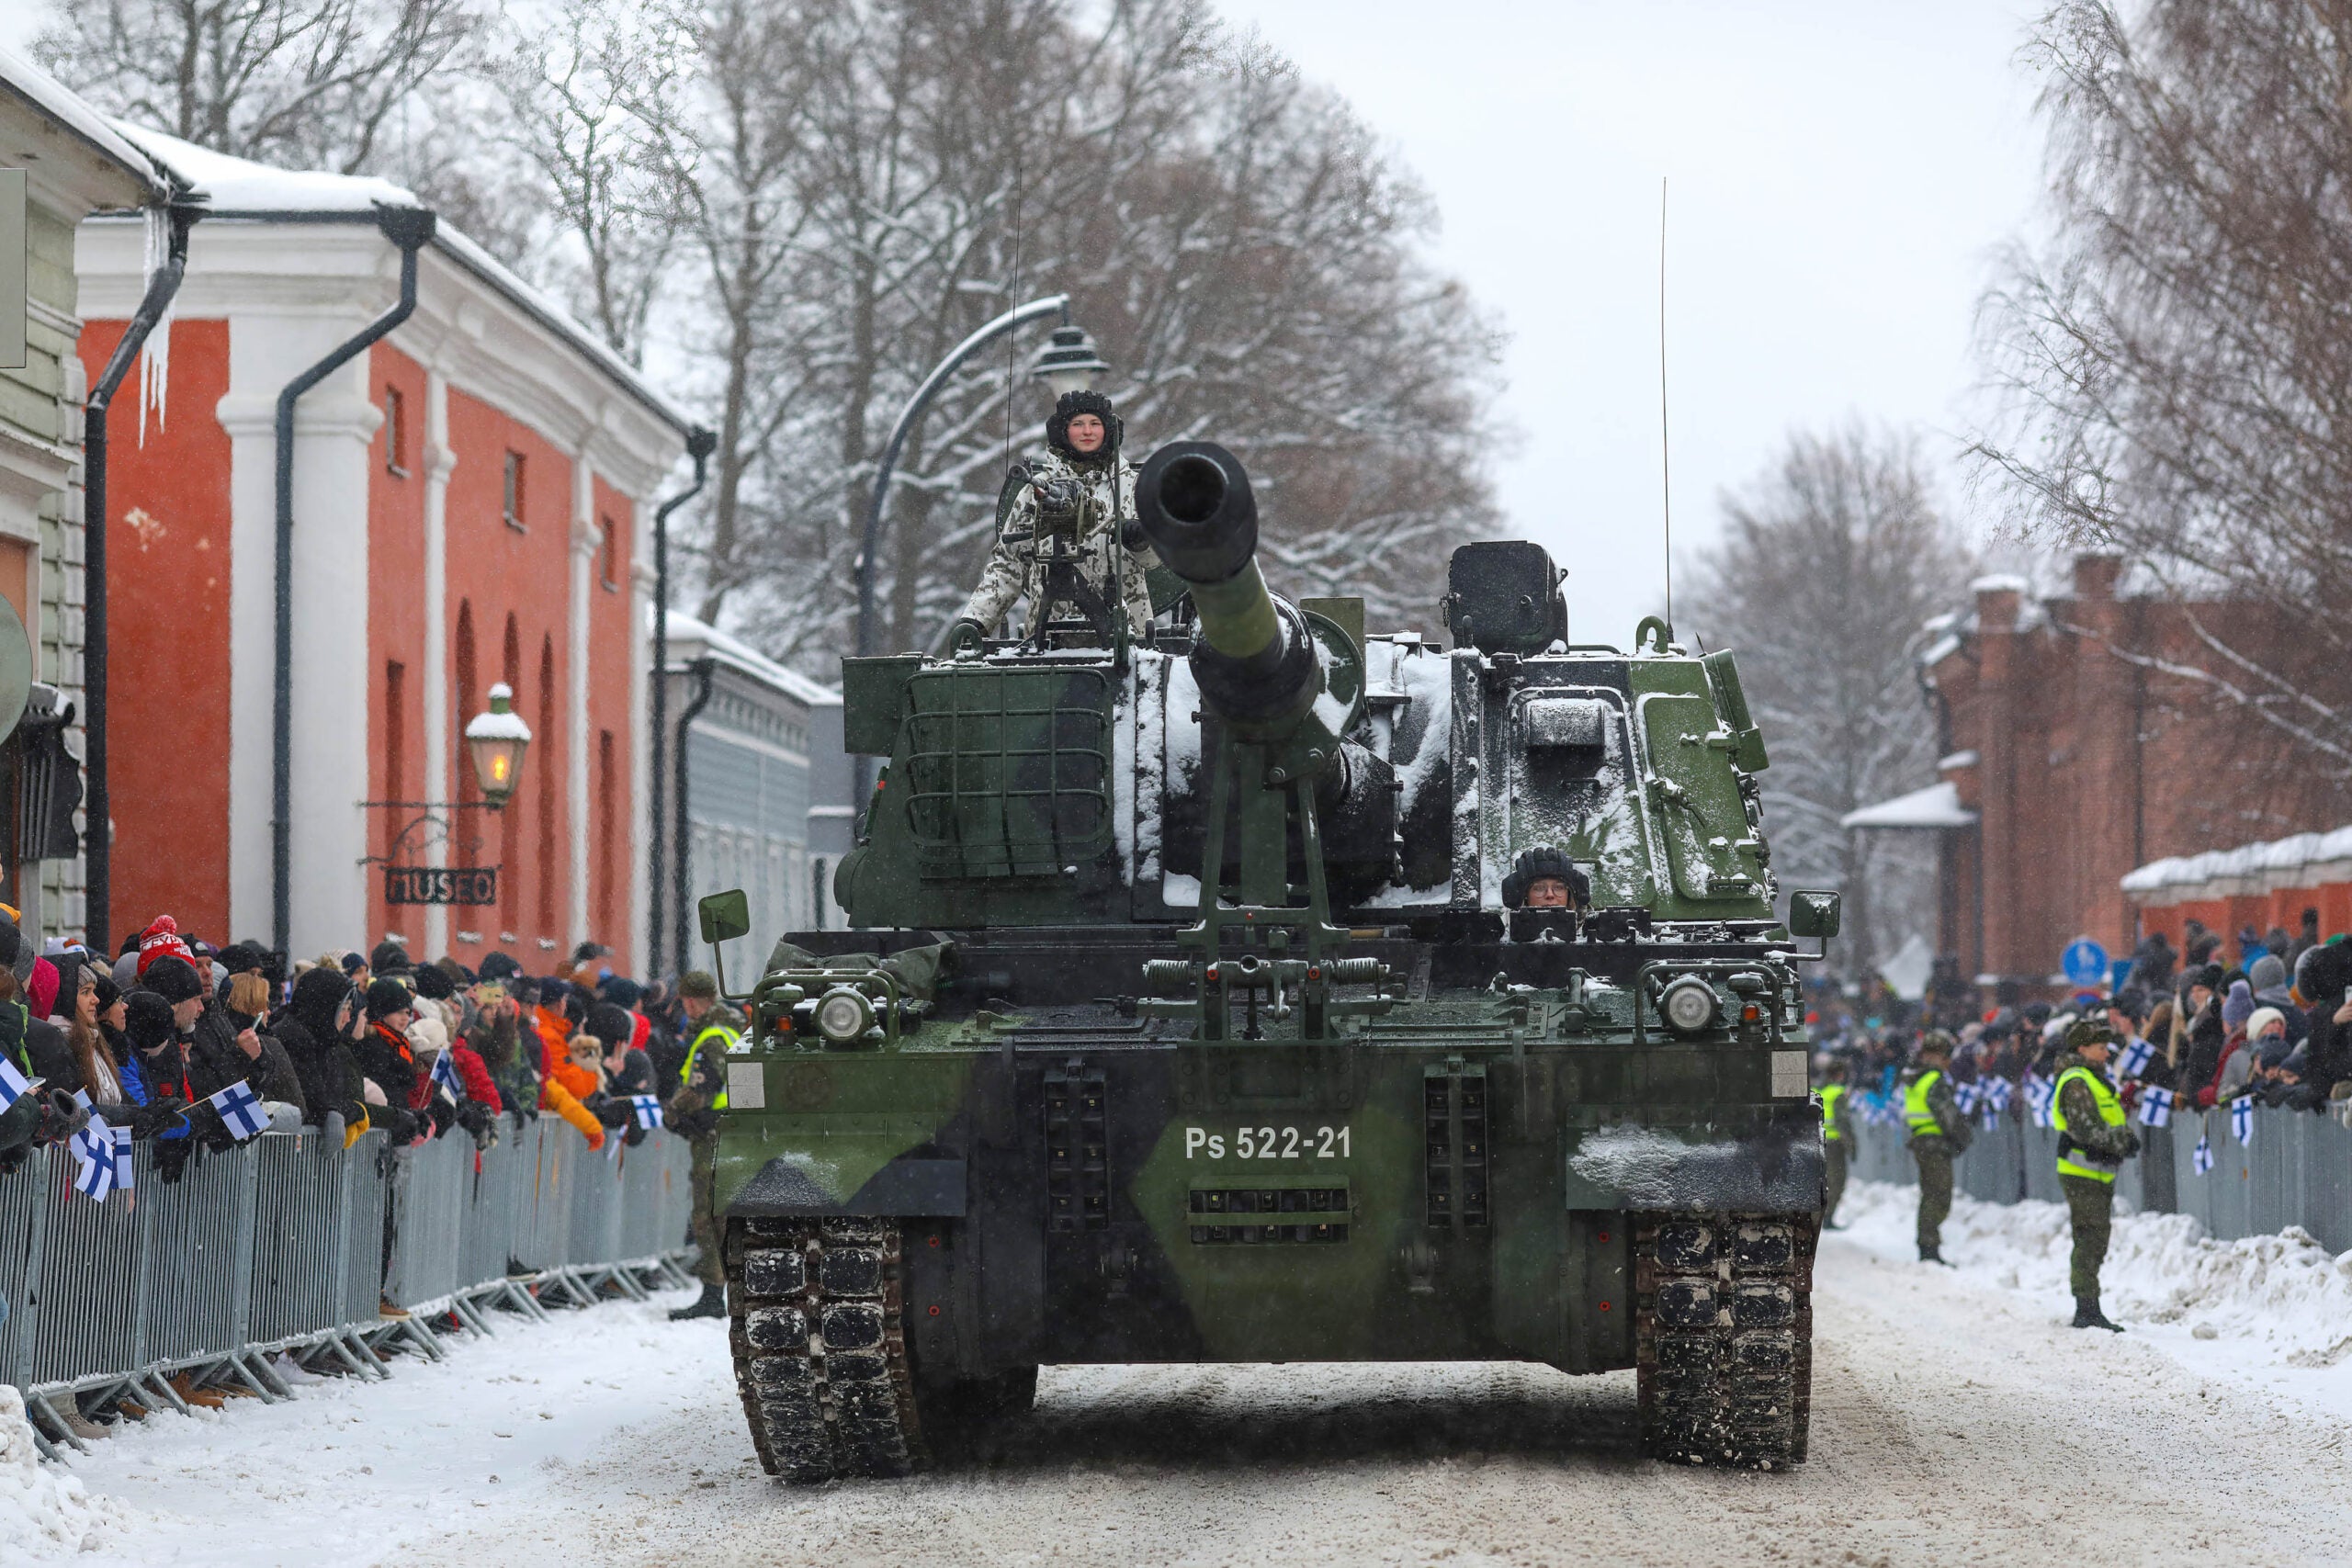 HAMINA, FINLAND - 2022/12/06: A Military vehicle of the armed forces of Finland moves along the street of the city during the event. The Finnish Defence Forces celebrated the 105th Independence Day of Finland with a national parade. The theme of the parade was Security will be done together. (Photo by Takimoto Marina/SOPA Images/LightRocket via Getty Images)